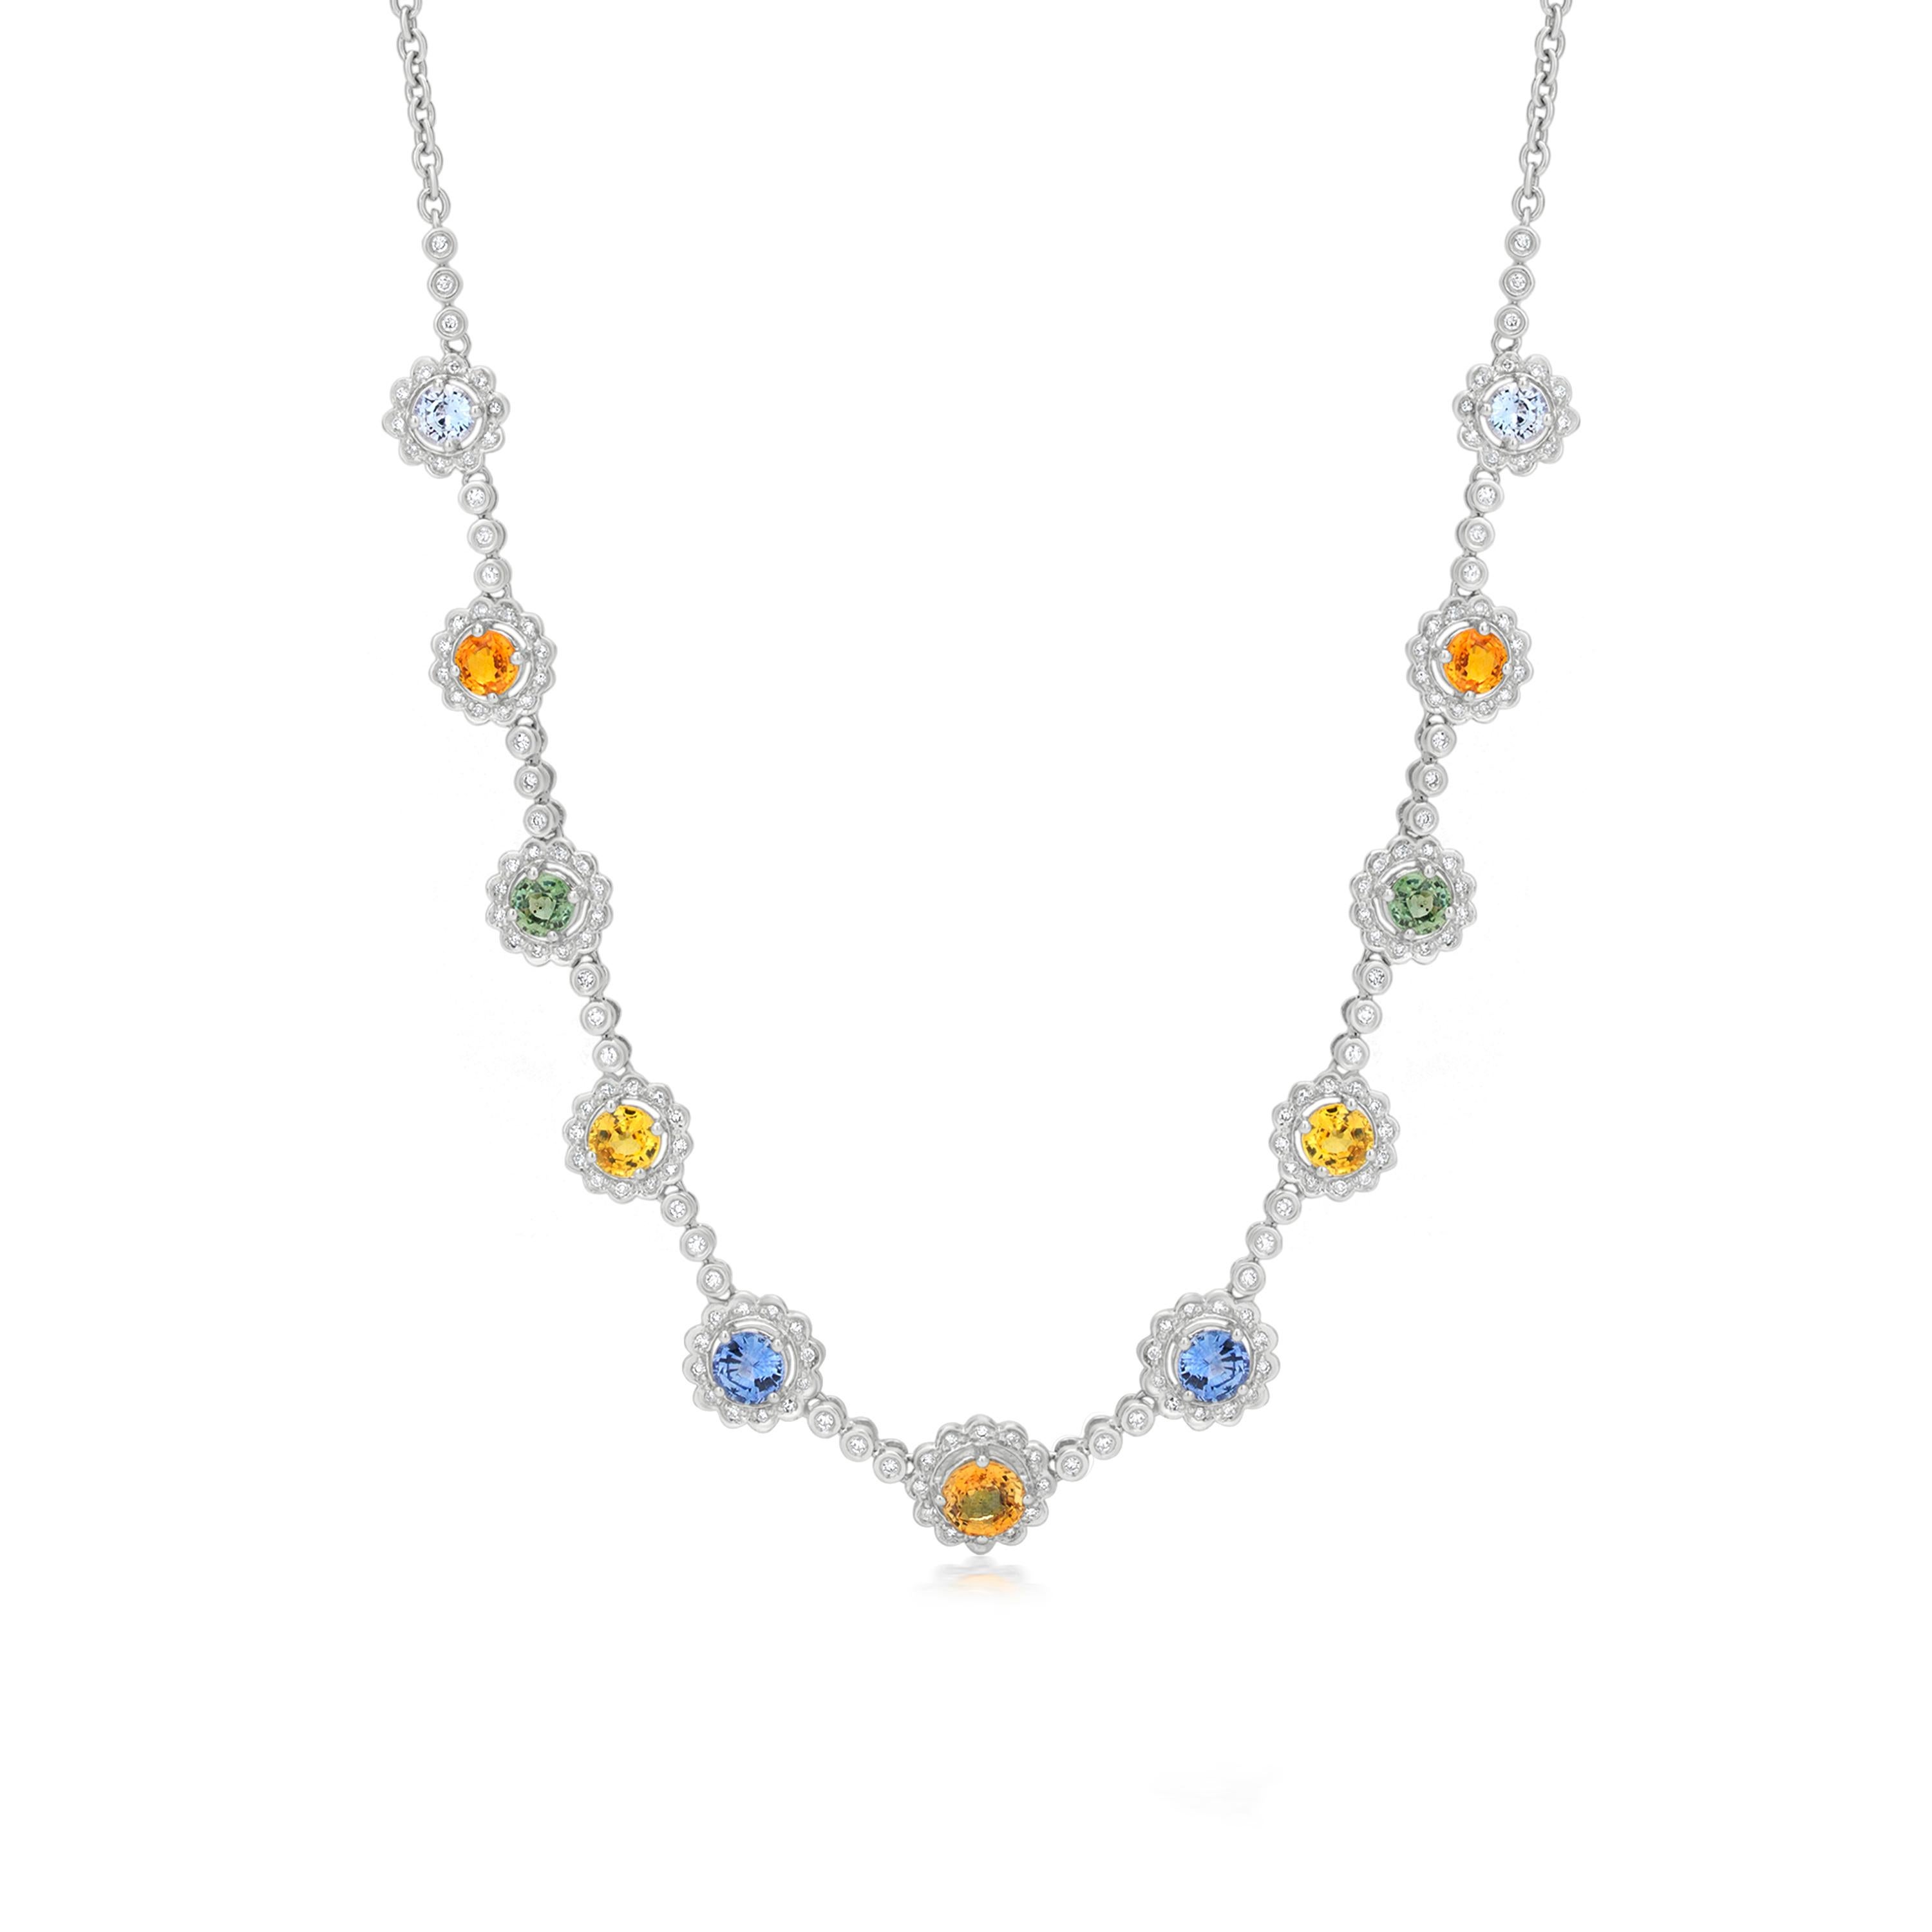 Contemporary Gemistry 5.57CT Multi Sapphire Station Necklace with Diamond Accents in 18k Gold